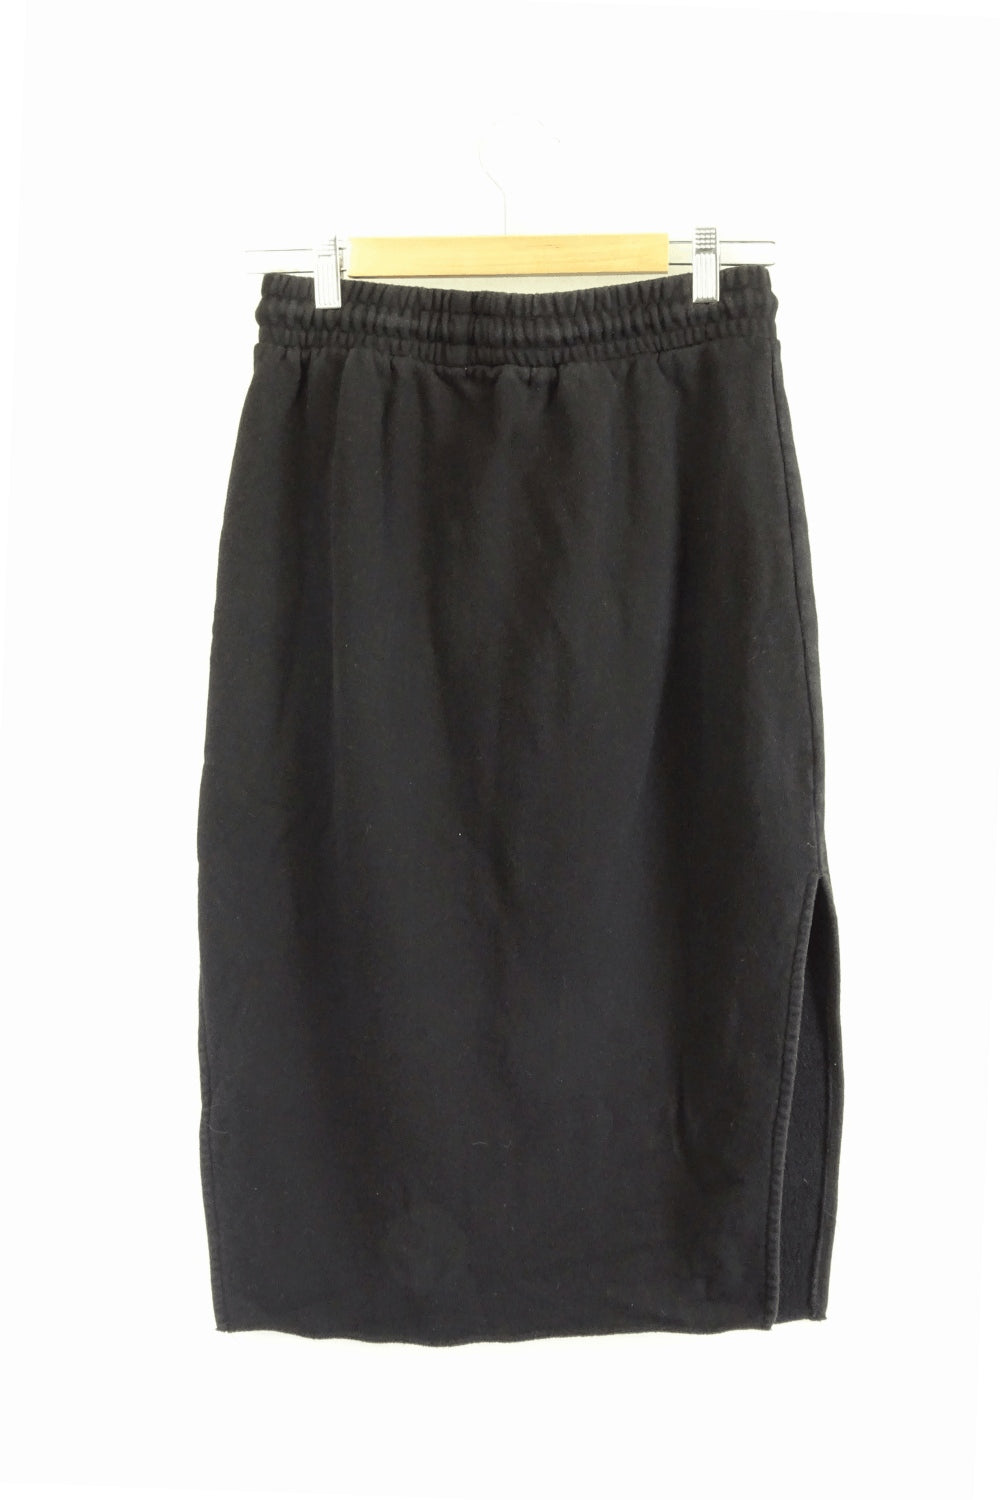 Nude Lucy Black Skirt S